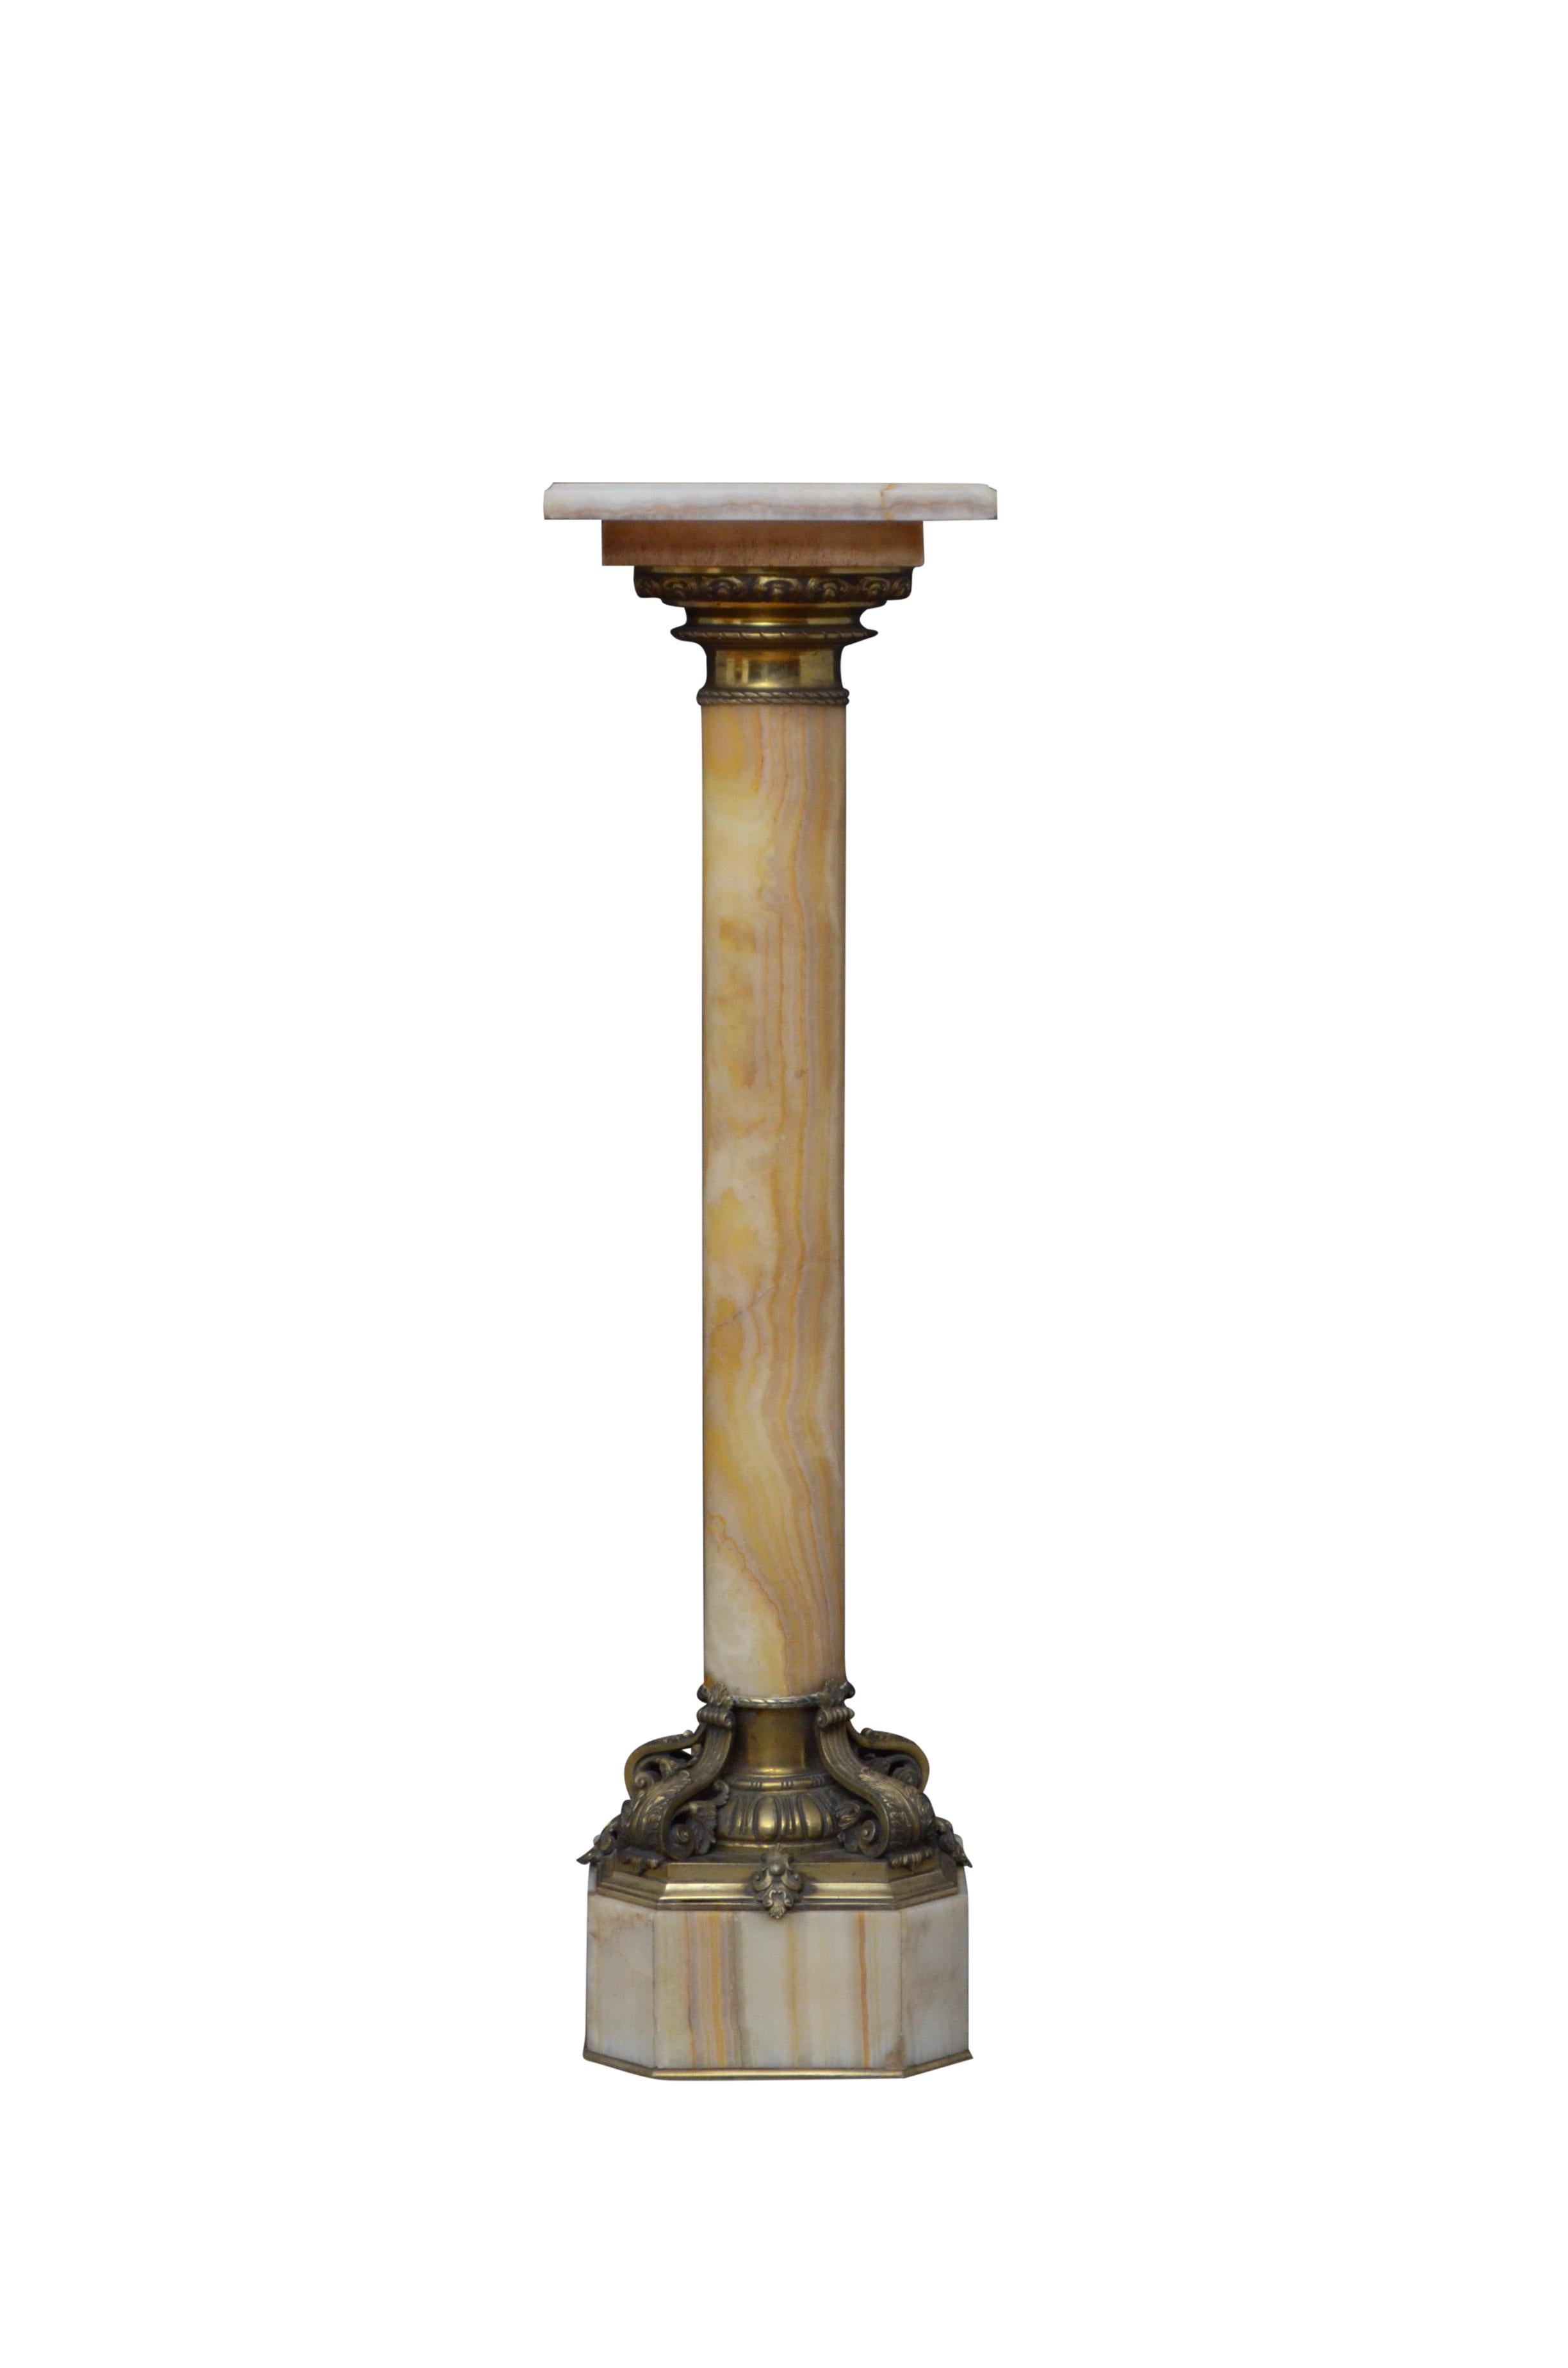 Outstanding XIXth century onyx pedestal with revolving top with ormolu collar below, substantial column with variety of colours terminating in most beautiful base with egg and dart decoration and four scrolled leaves, standing on canted base and